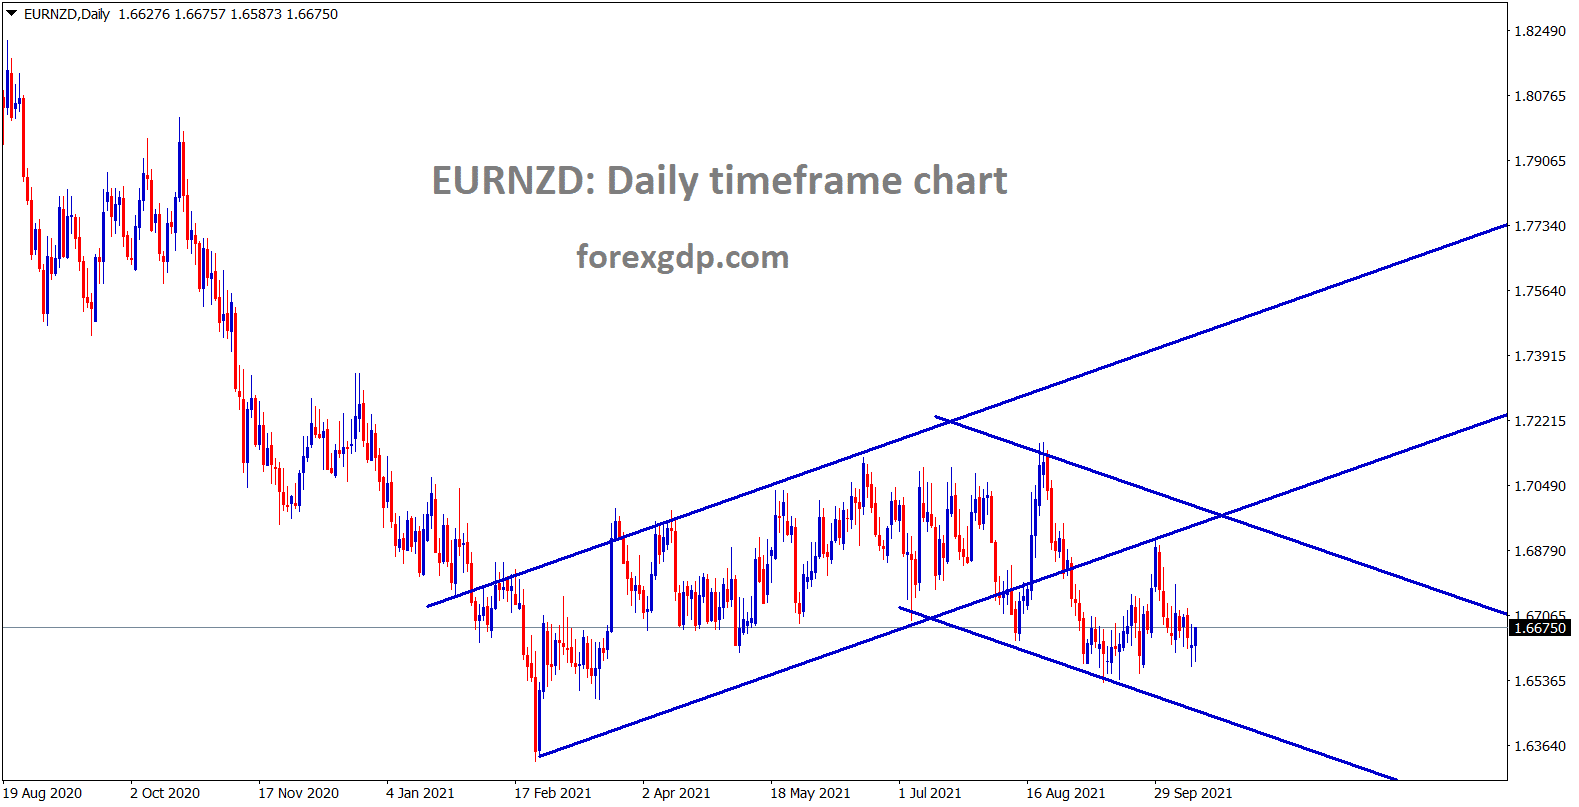 EURNZD is moving in a channel ranges